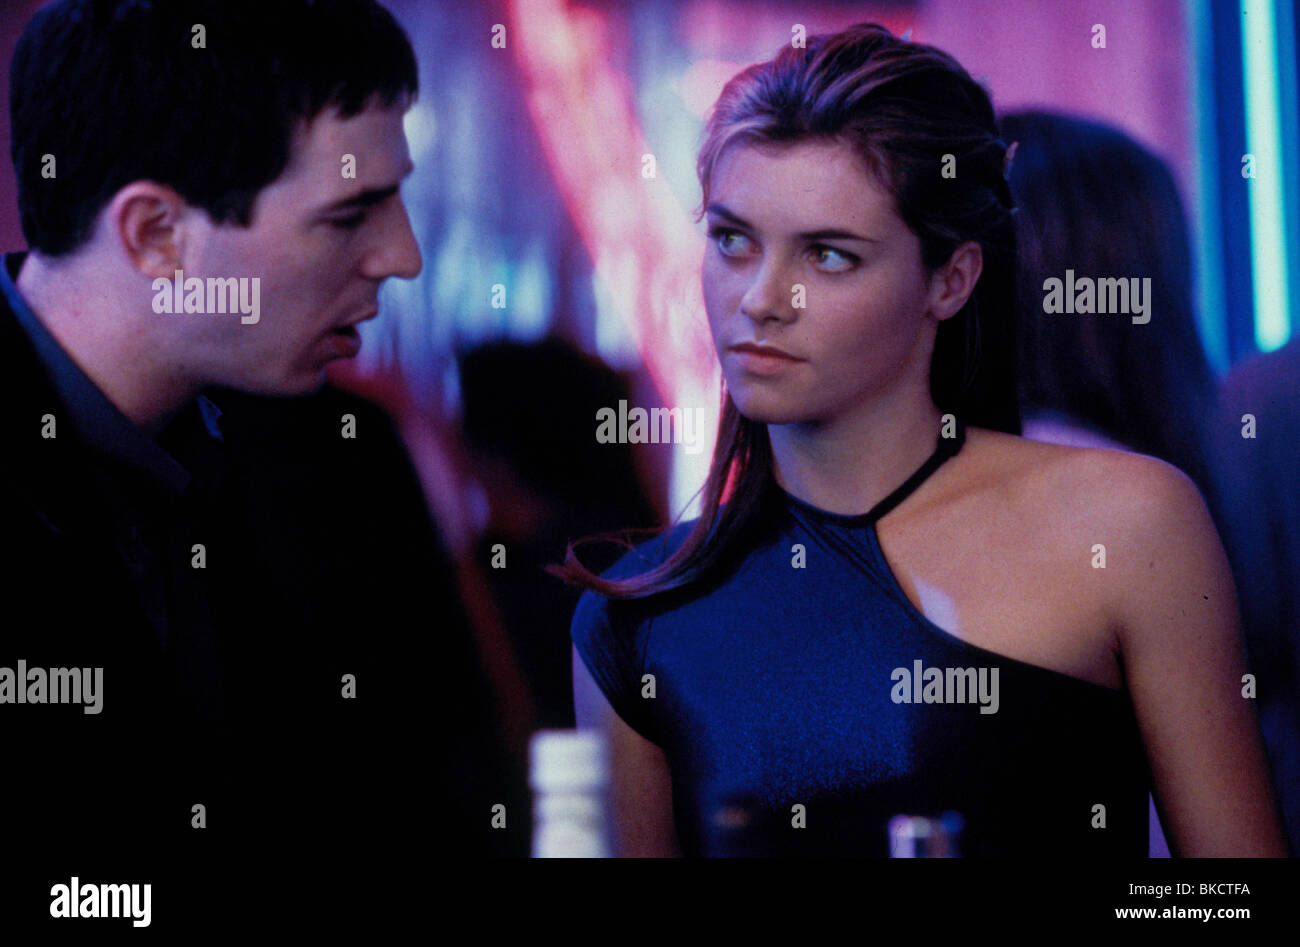 ESSEX BOYS (2000) CHARLIE CREED MILES, HOLLY DAVIDSON SSEX 002 Stock Photo